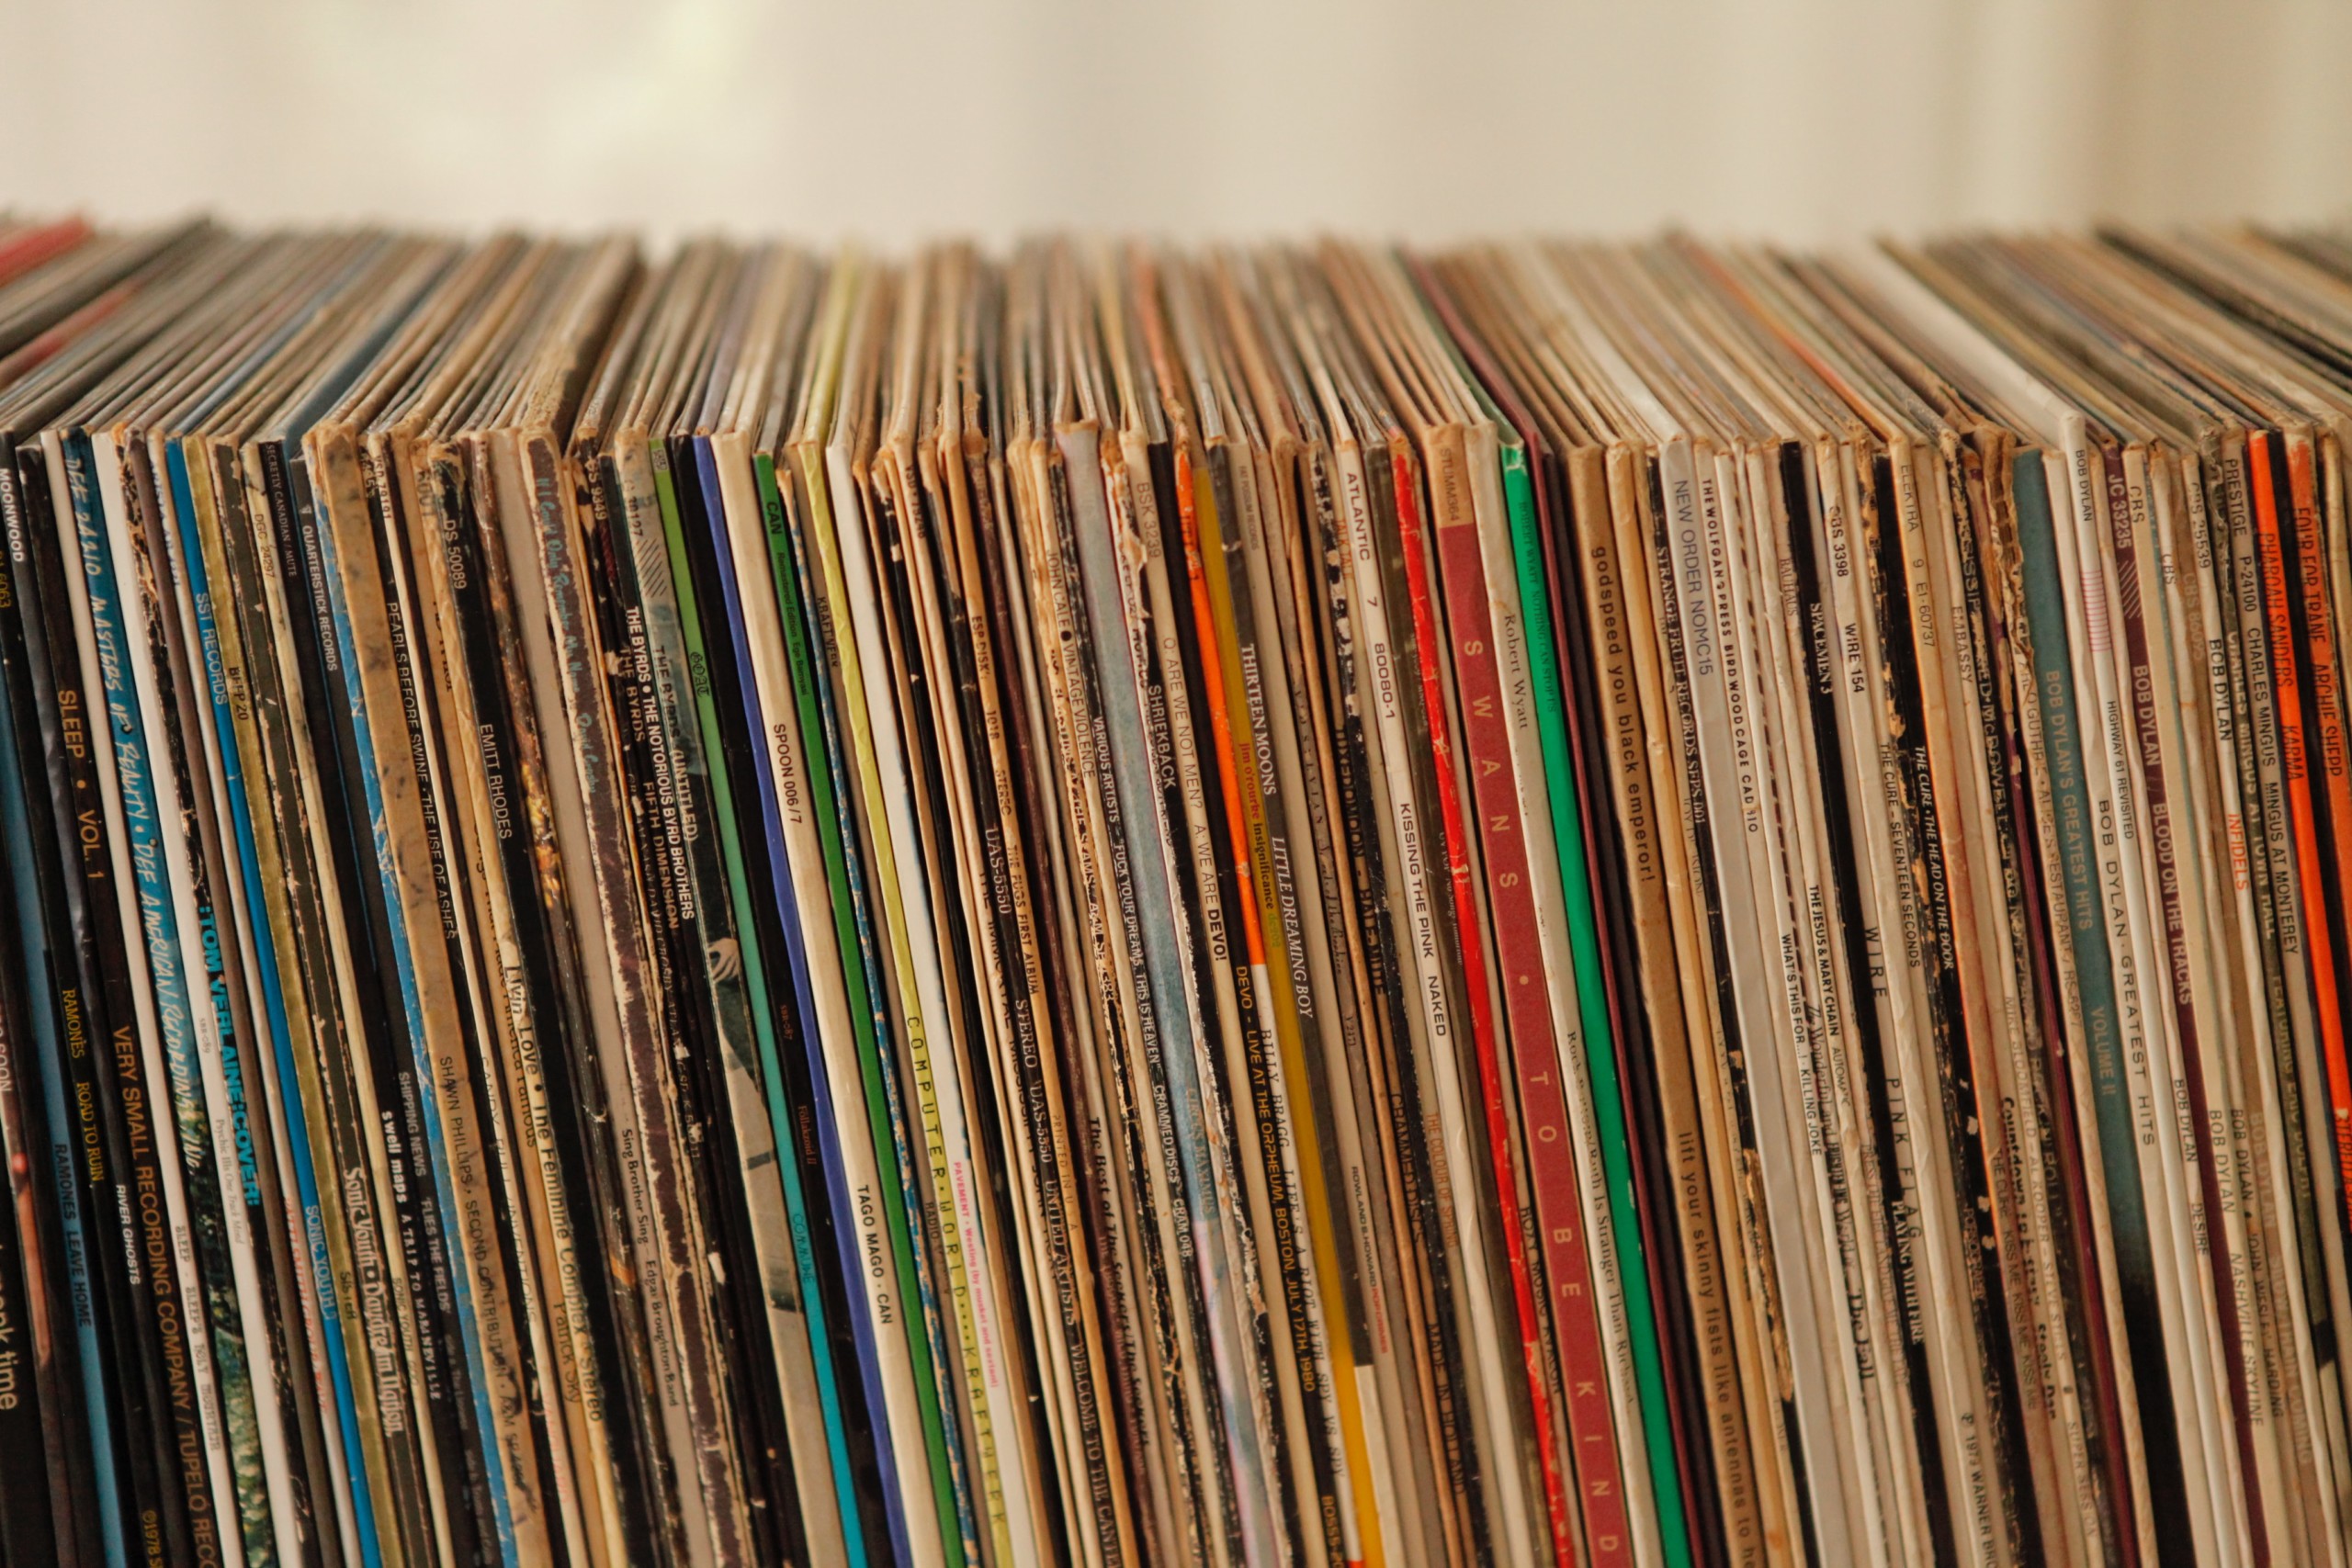 How Are Vinyl Records Graded